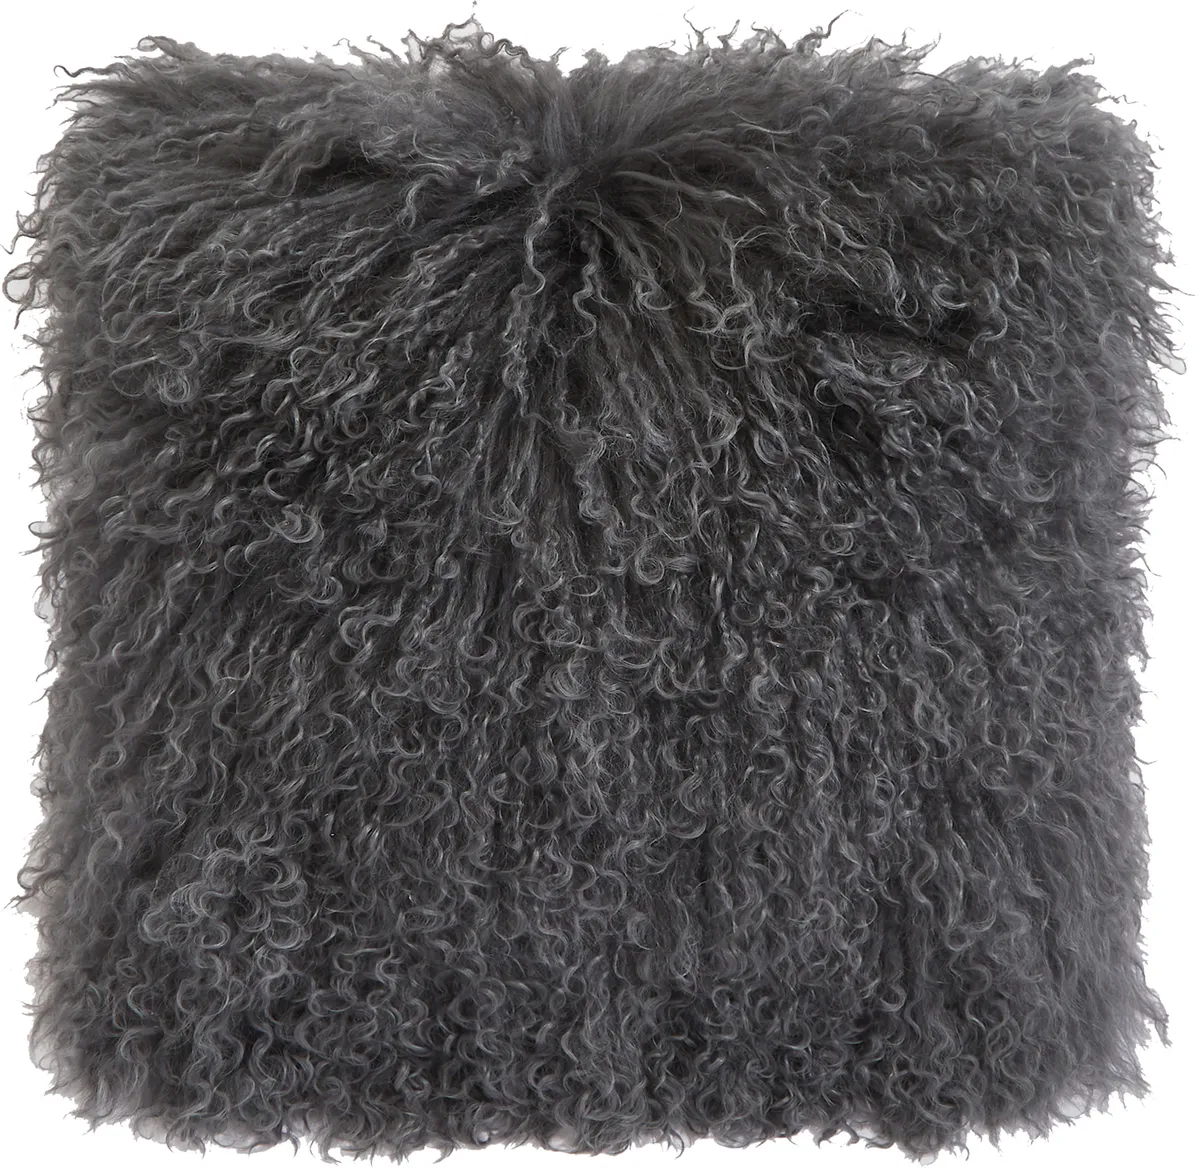 Pure Mongolian wool cushion in Charcoal, £45, Marks & Spencer